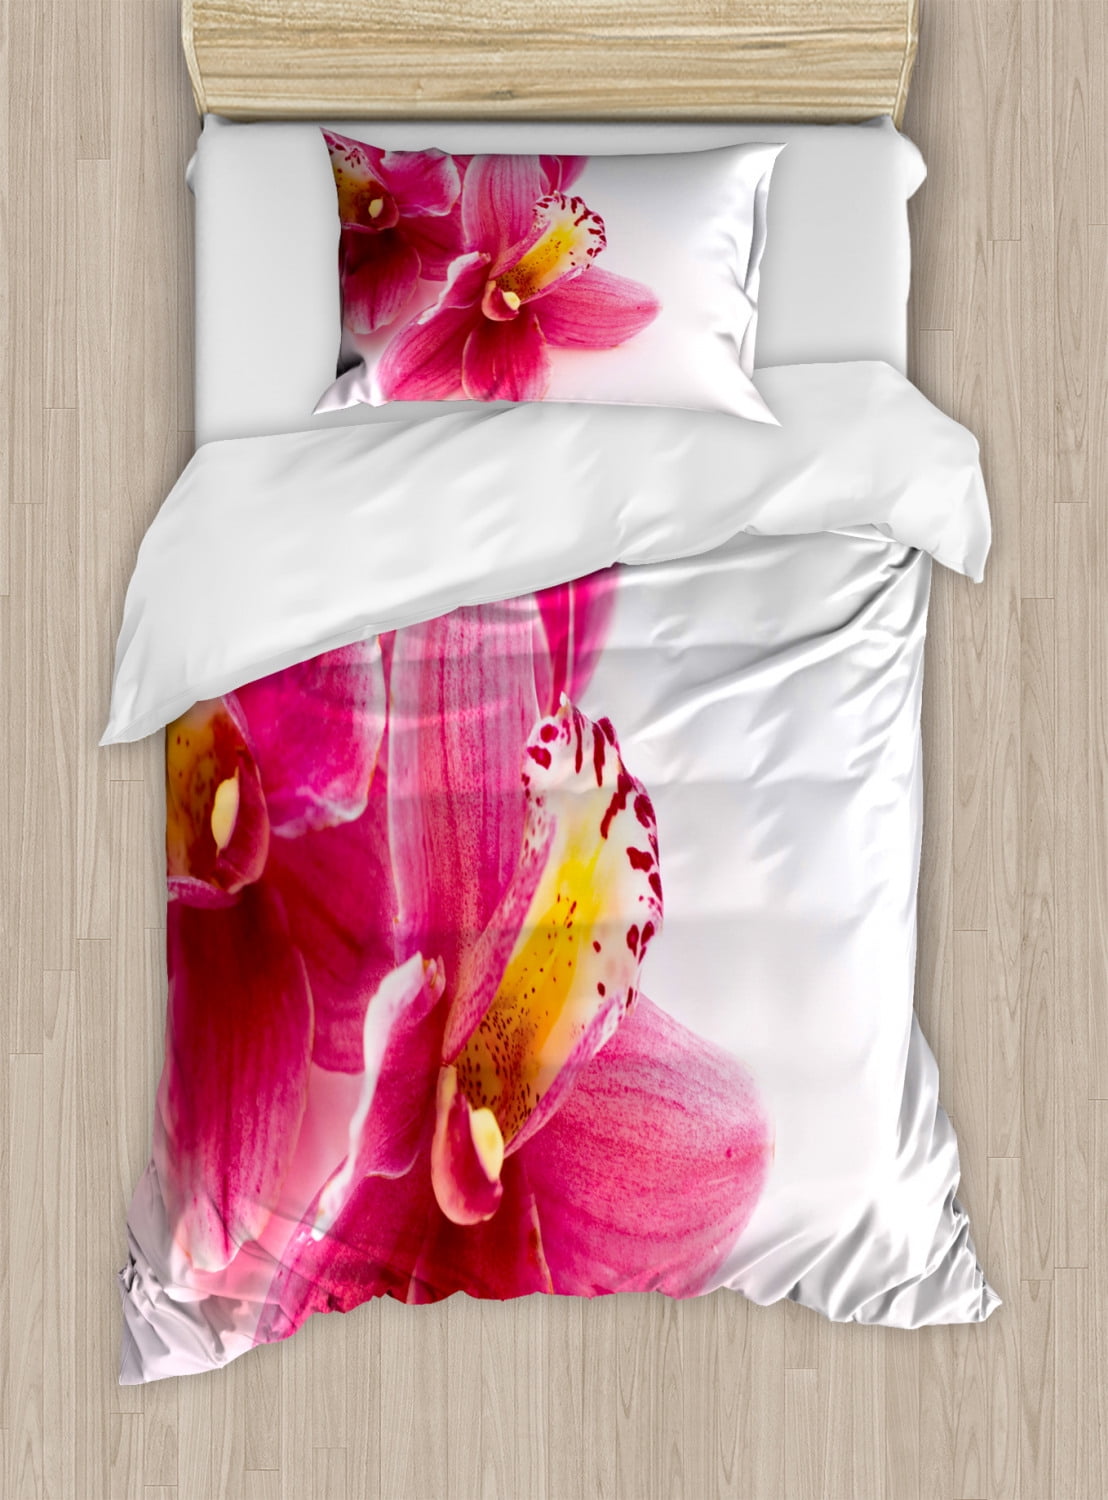 Oliven 3D Antelope Bedding Set Twin Size Hypoallergenic Soft Duvet Cover Twin 2 Pcs Home Decor 